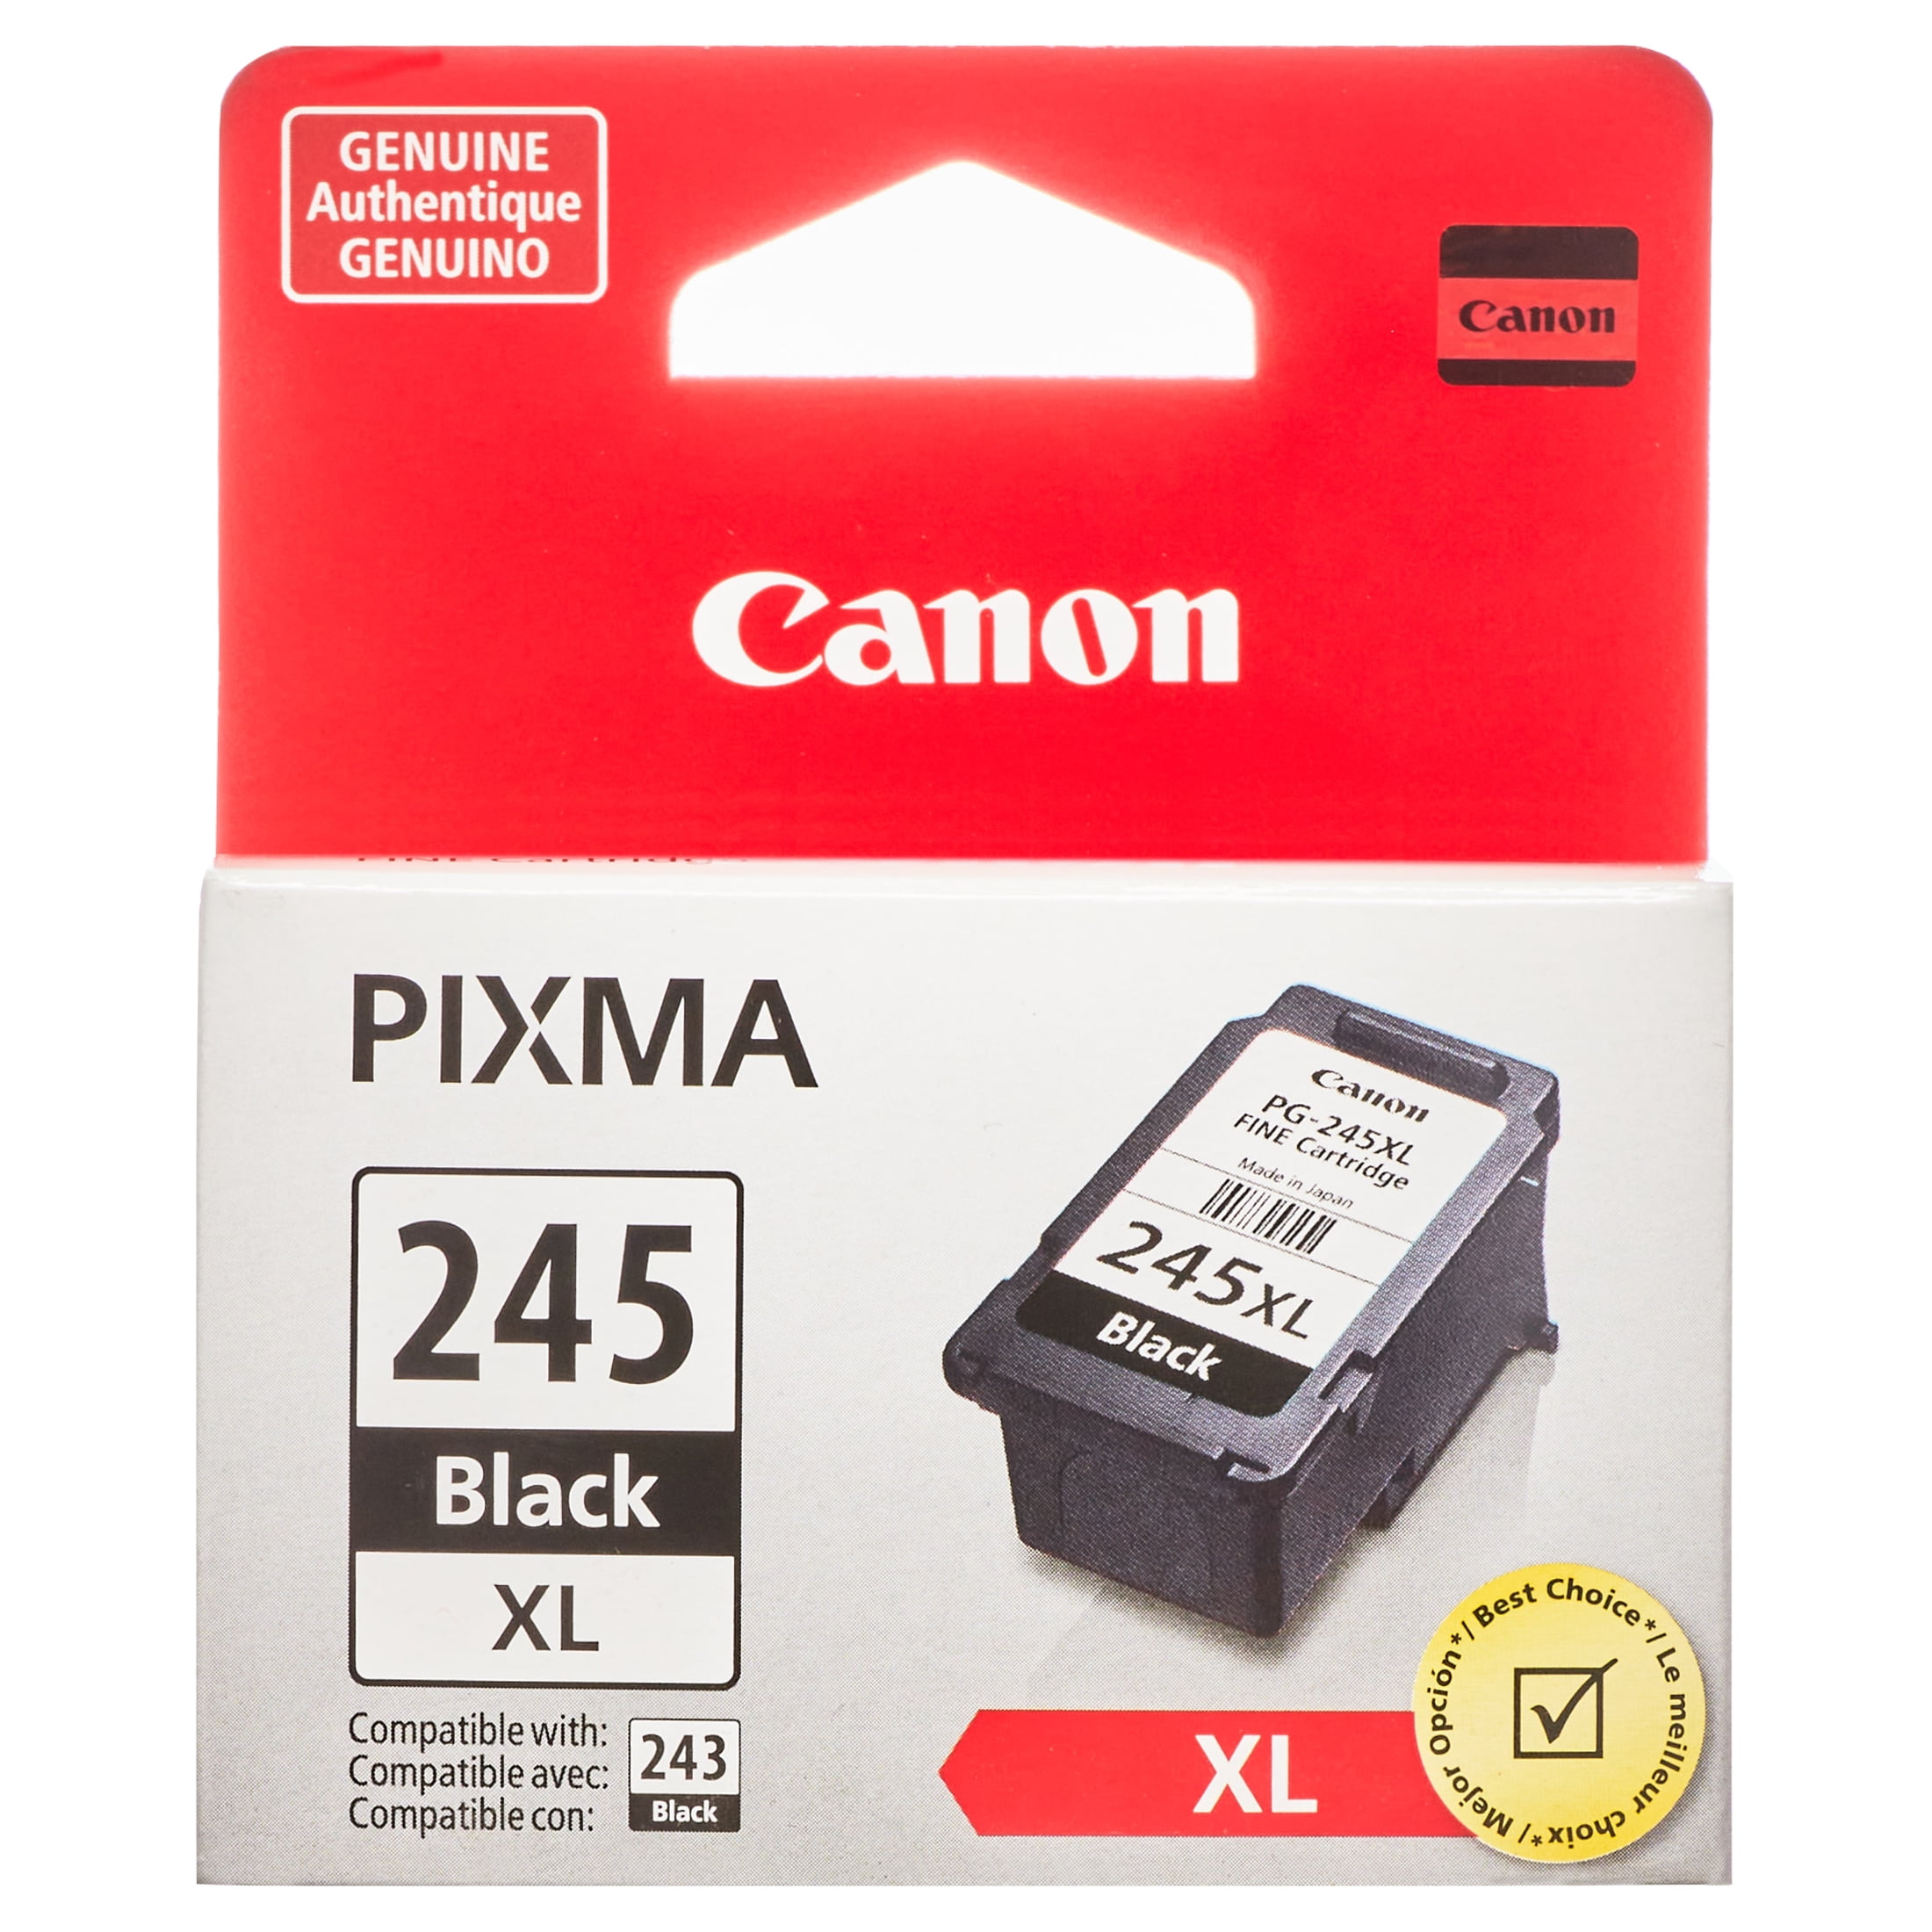 Canon PG-245XL Black Ink Cartridge, Compatible to iP2820, MG2420 